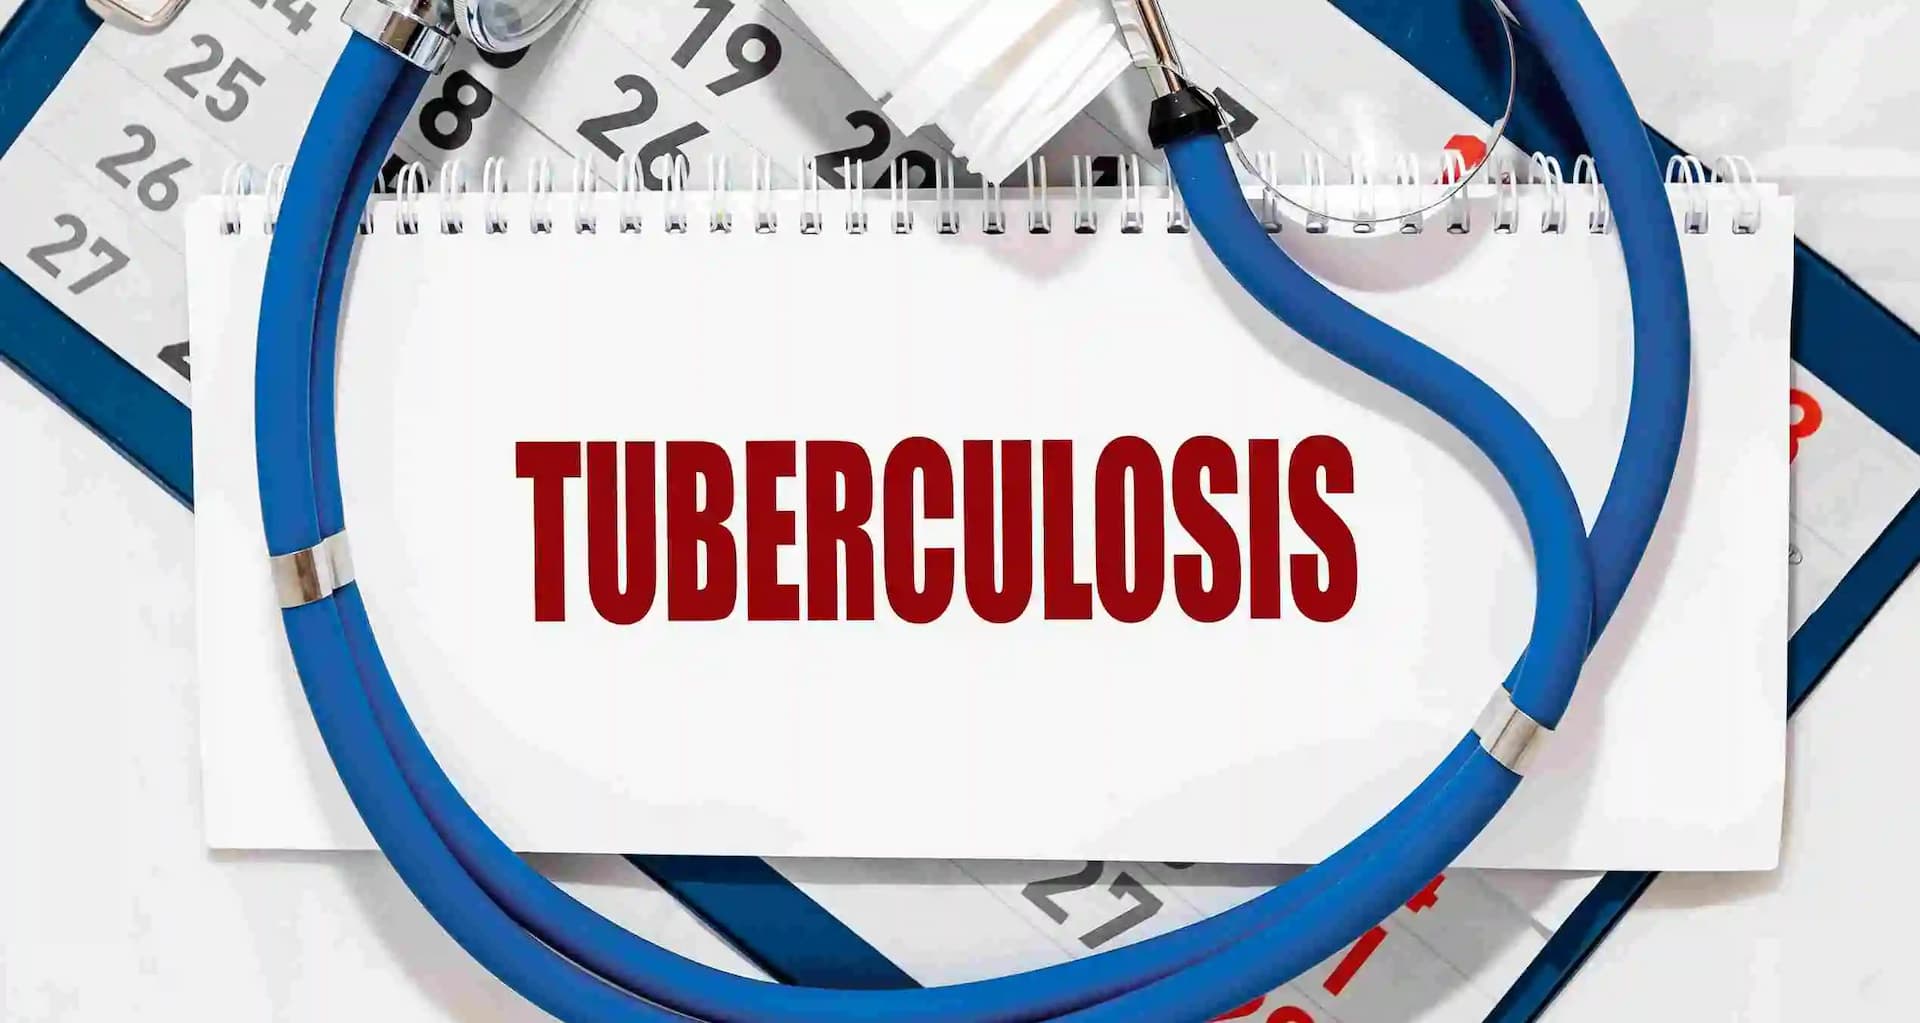 Tuberculosis Cases Rise as Covid-19 Fades in India